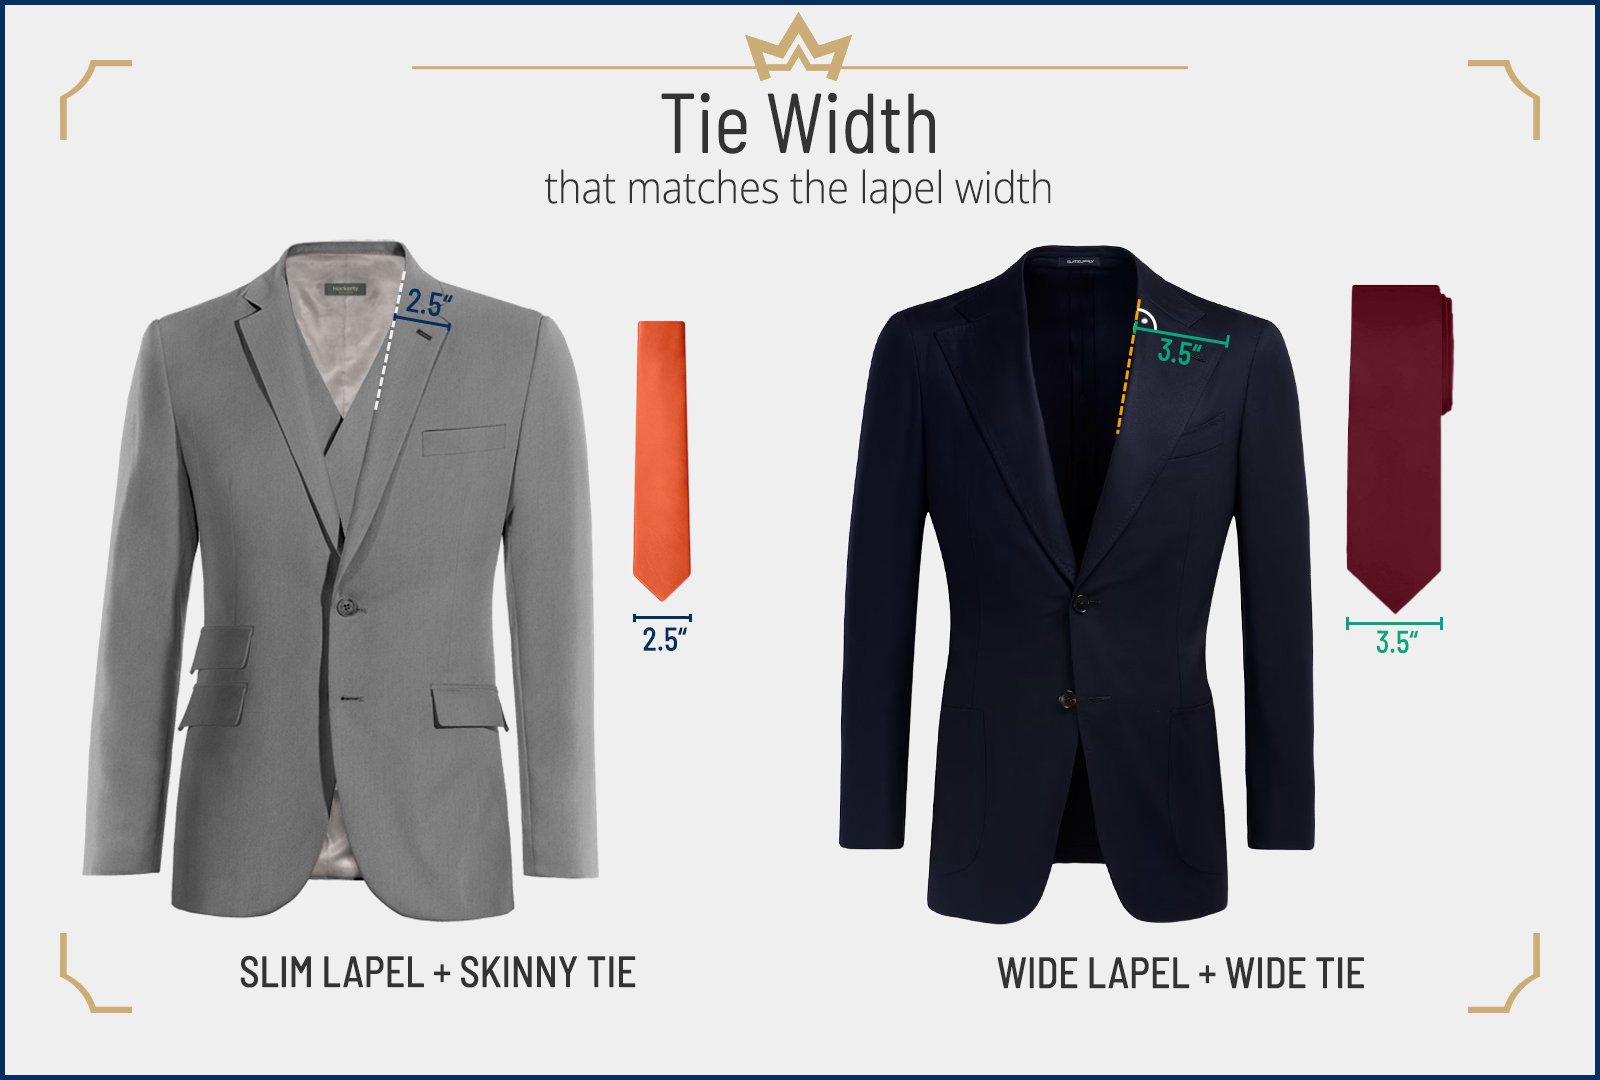 Different tie widths that match the lapel